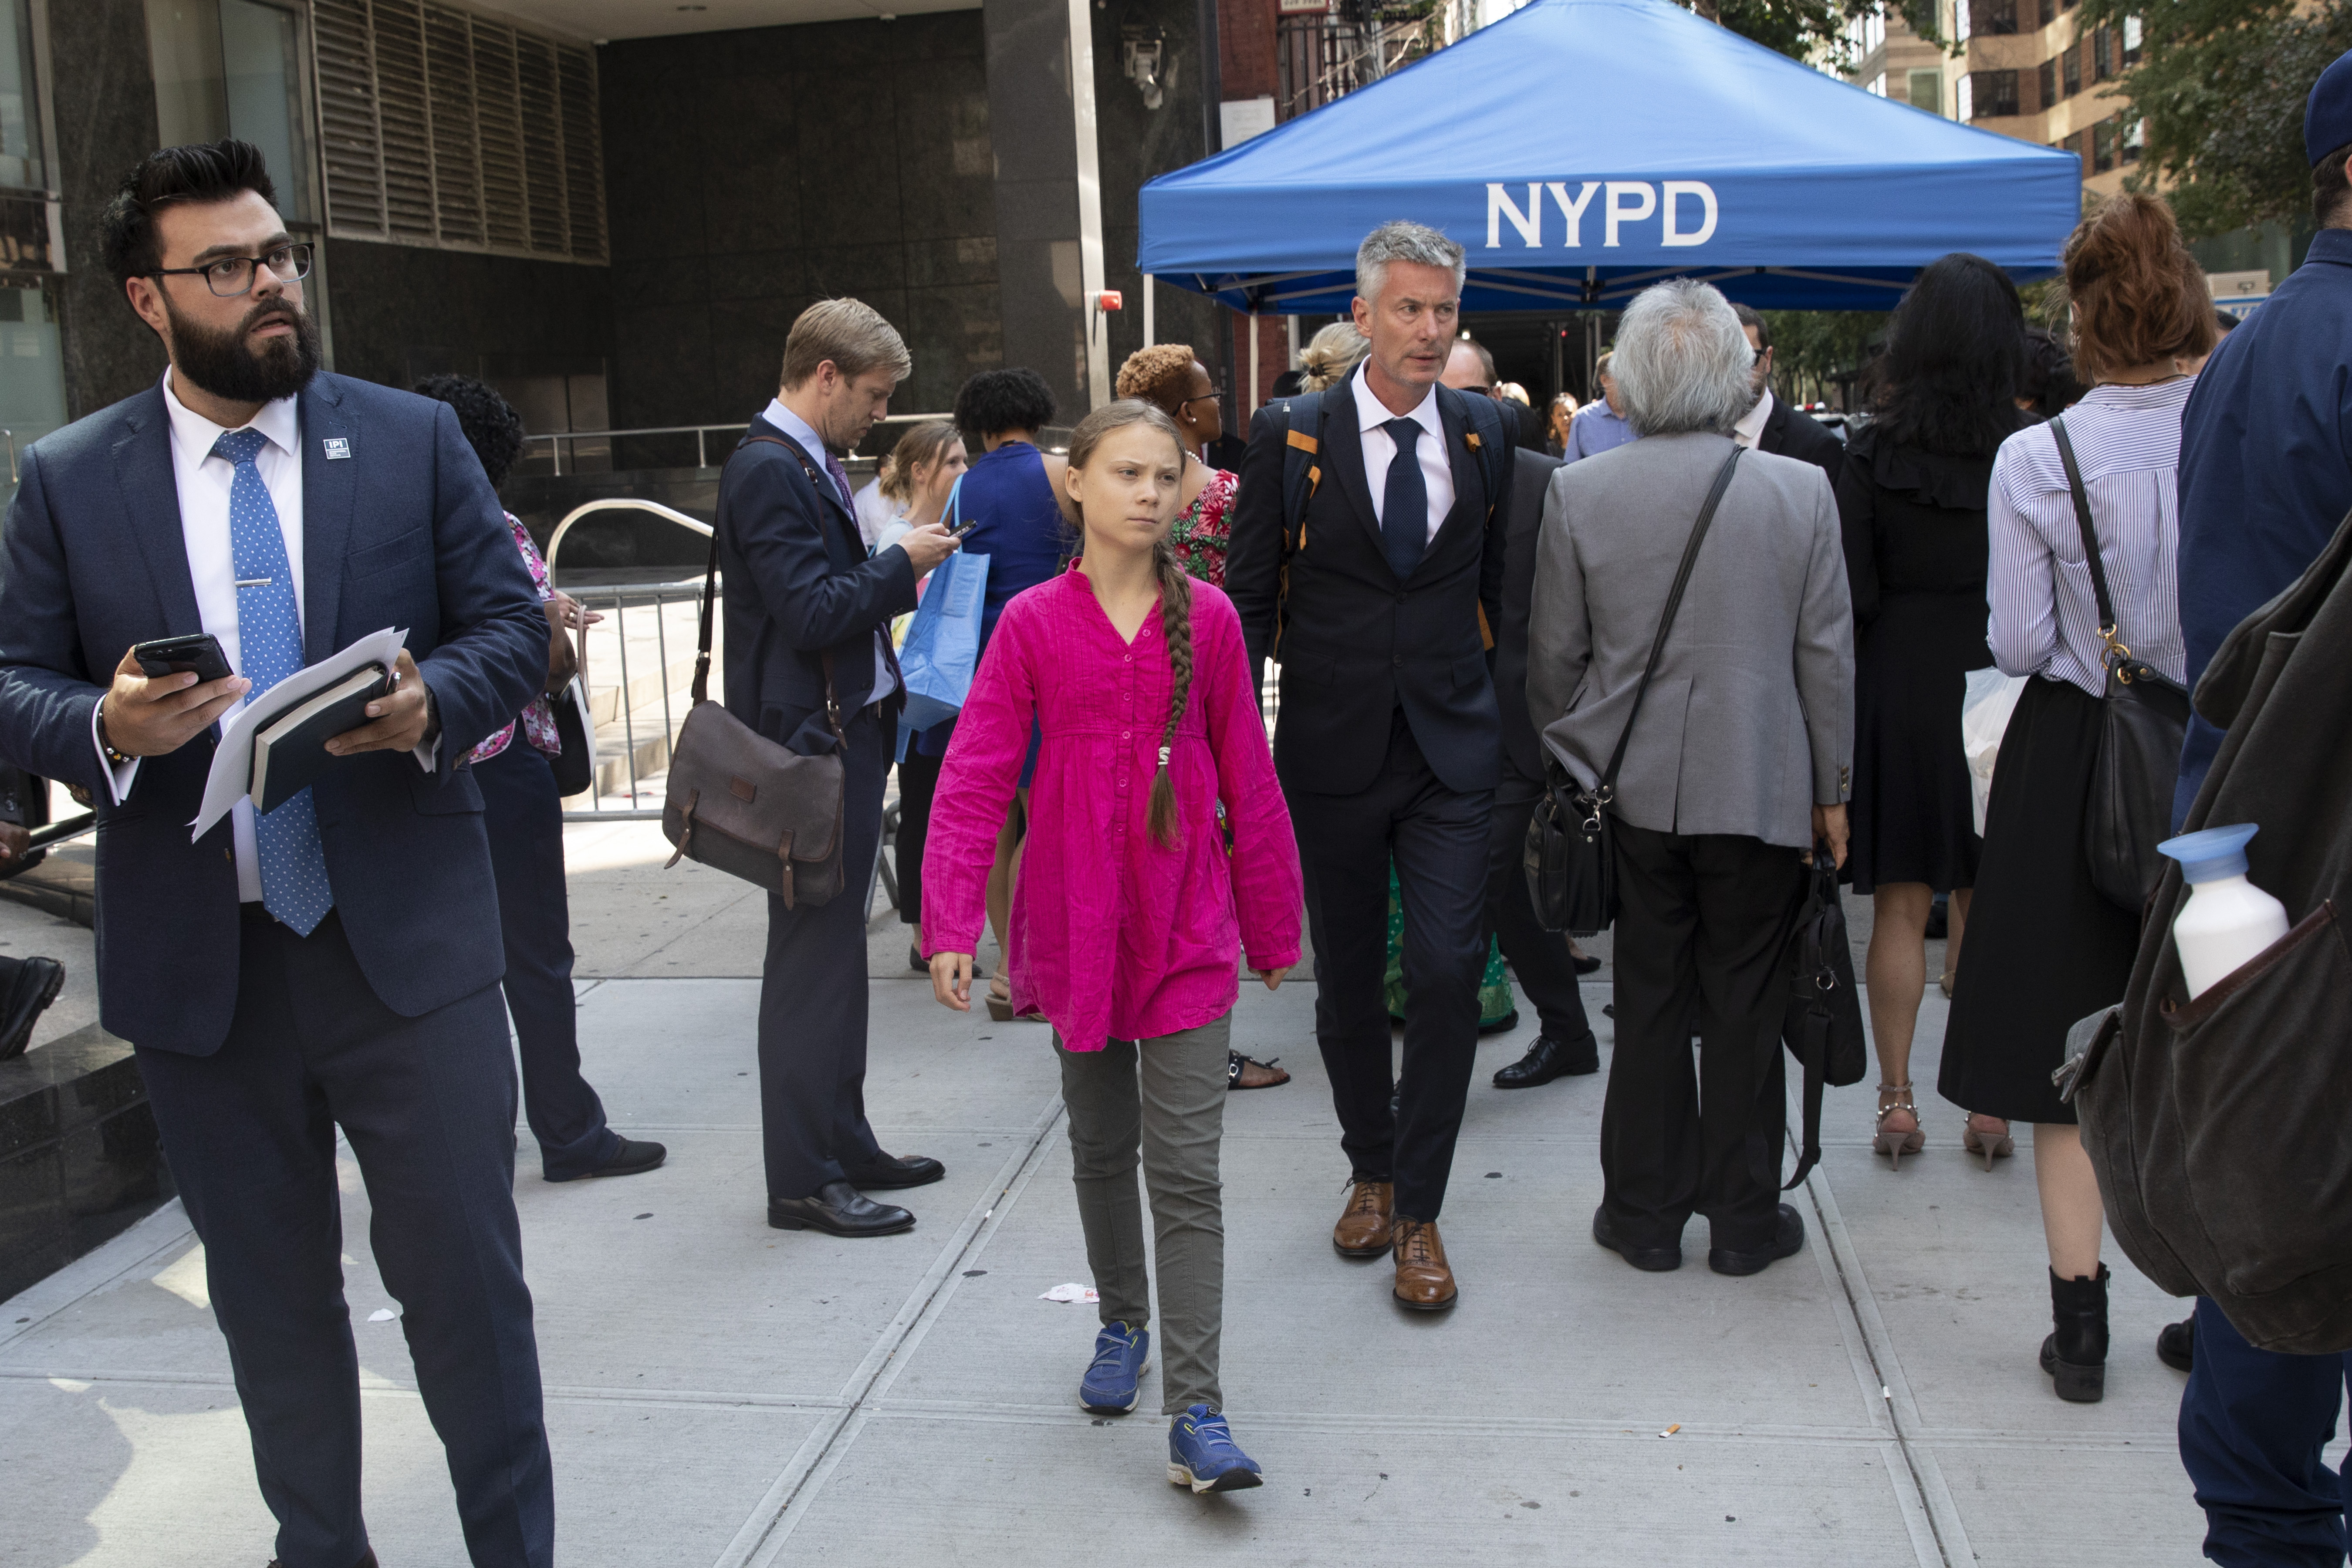 Environmental activist Greta Thunberg, center, of Sweden, walks with an entourage after passing a security checkpoint while appearing at the United Nations, Monday, Sept. 23, 2019 in New York. (AP Photo/Mark Lennihan)